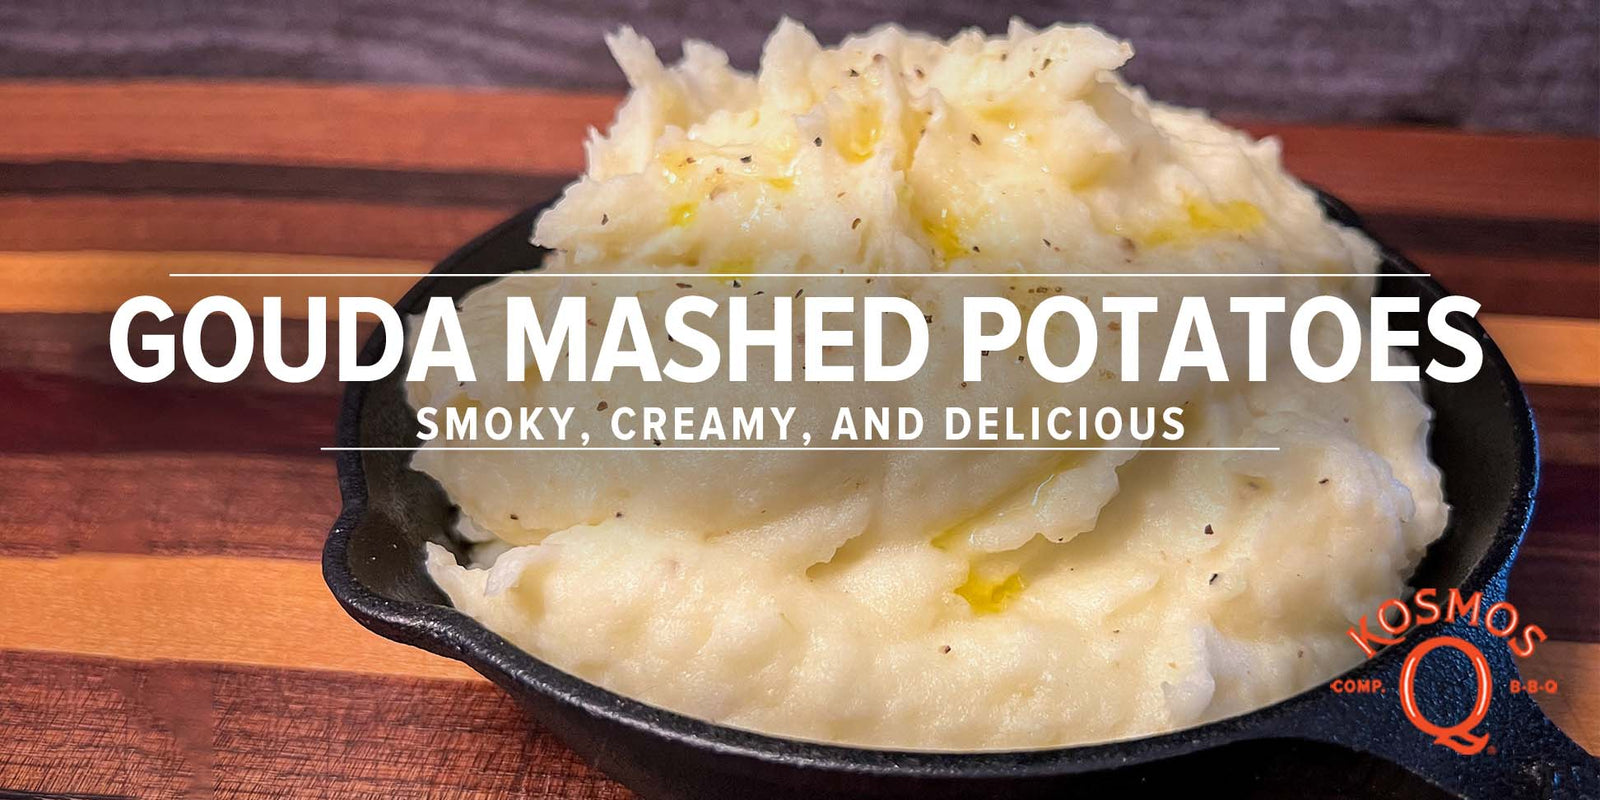 Monday's Side Dish - Instant Mashed Potatoes